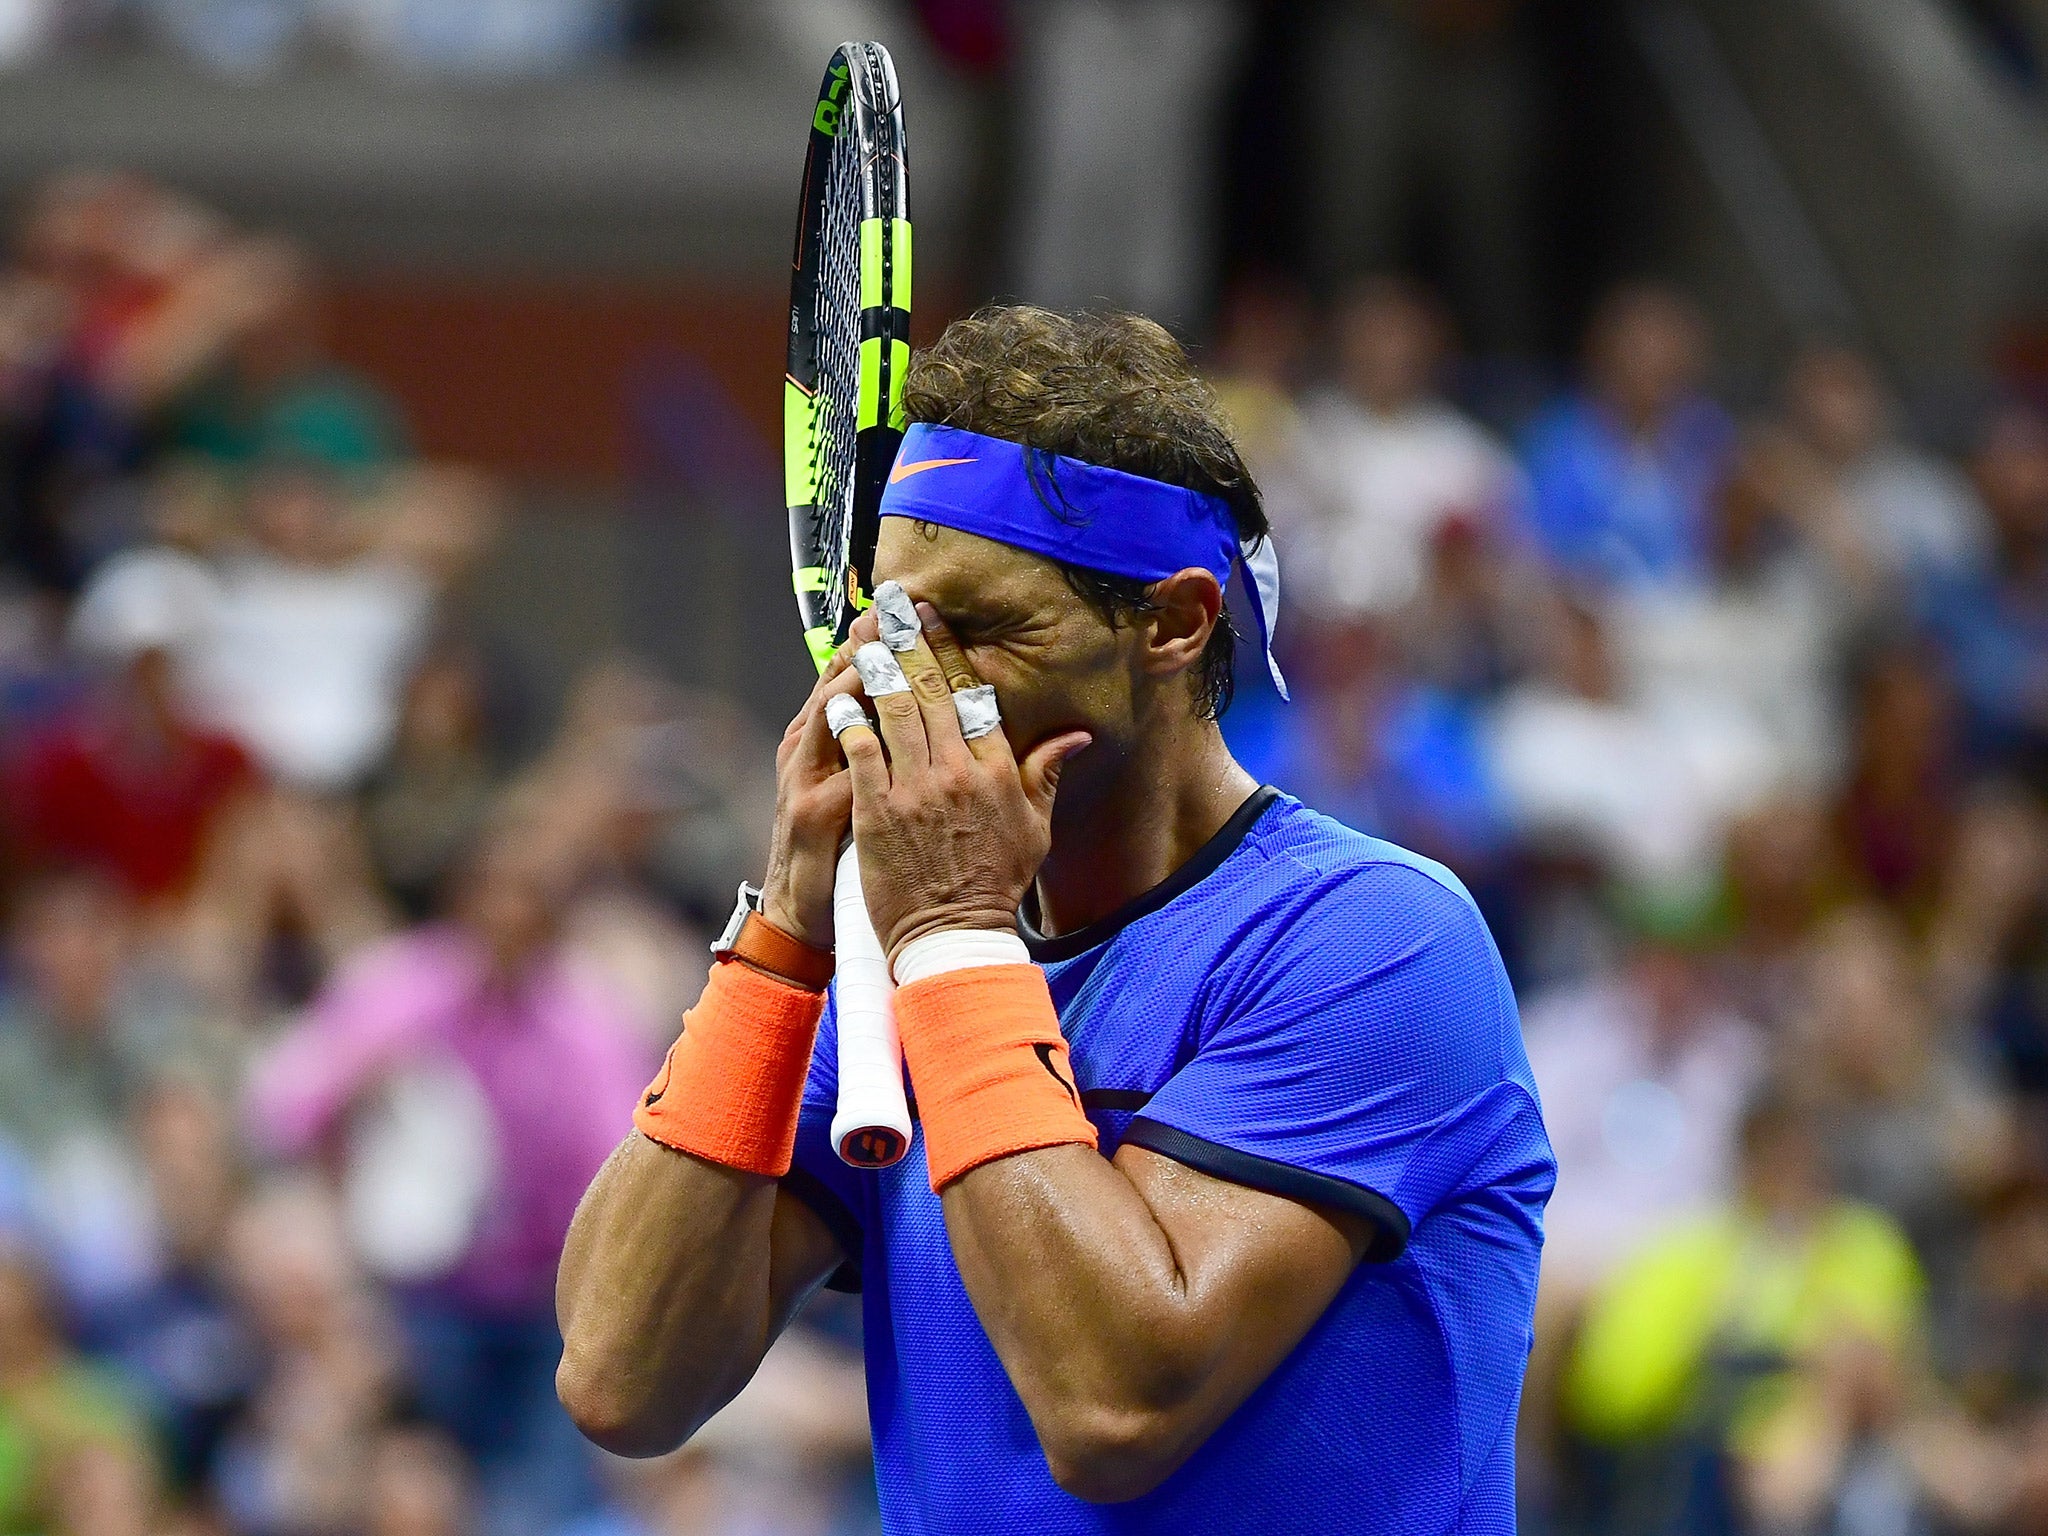 Nadal failed to pass the fourth round for a fifth straight Grand Slam